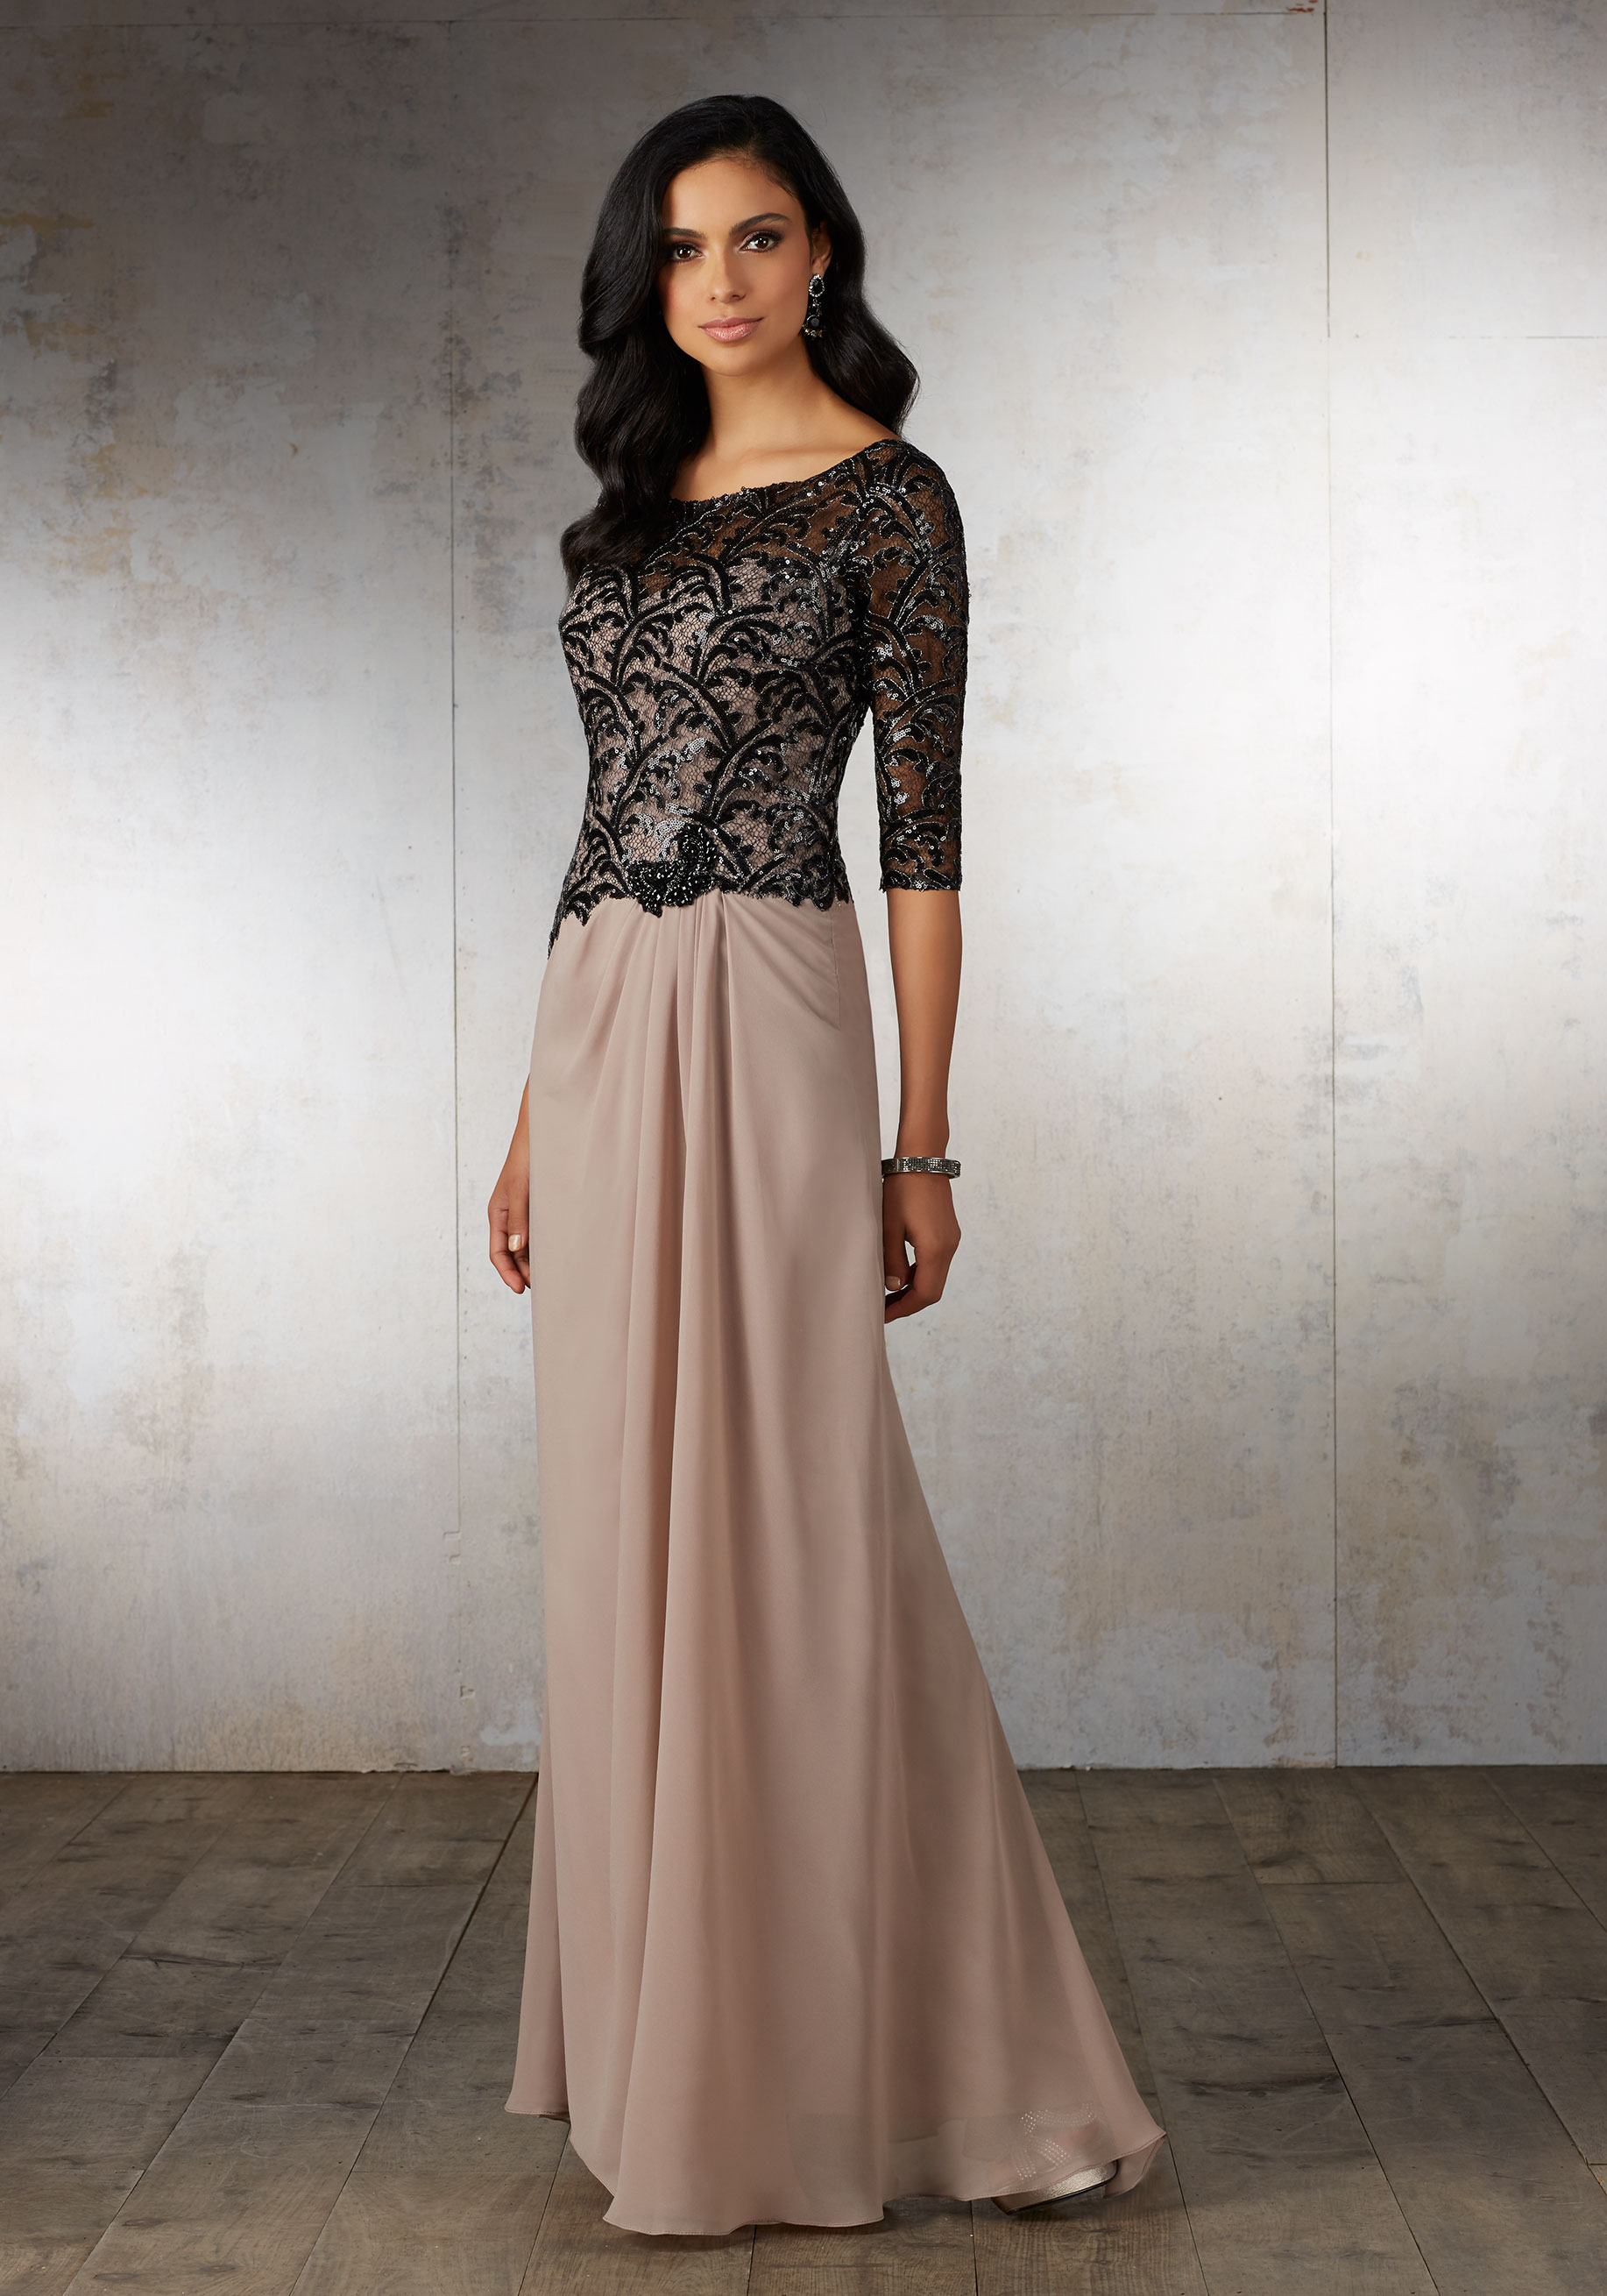 Chiffon Special Occasion Dress with Sequined Embroidery on Bodice